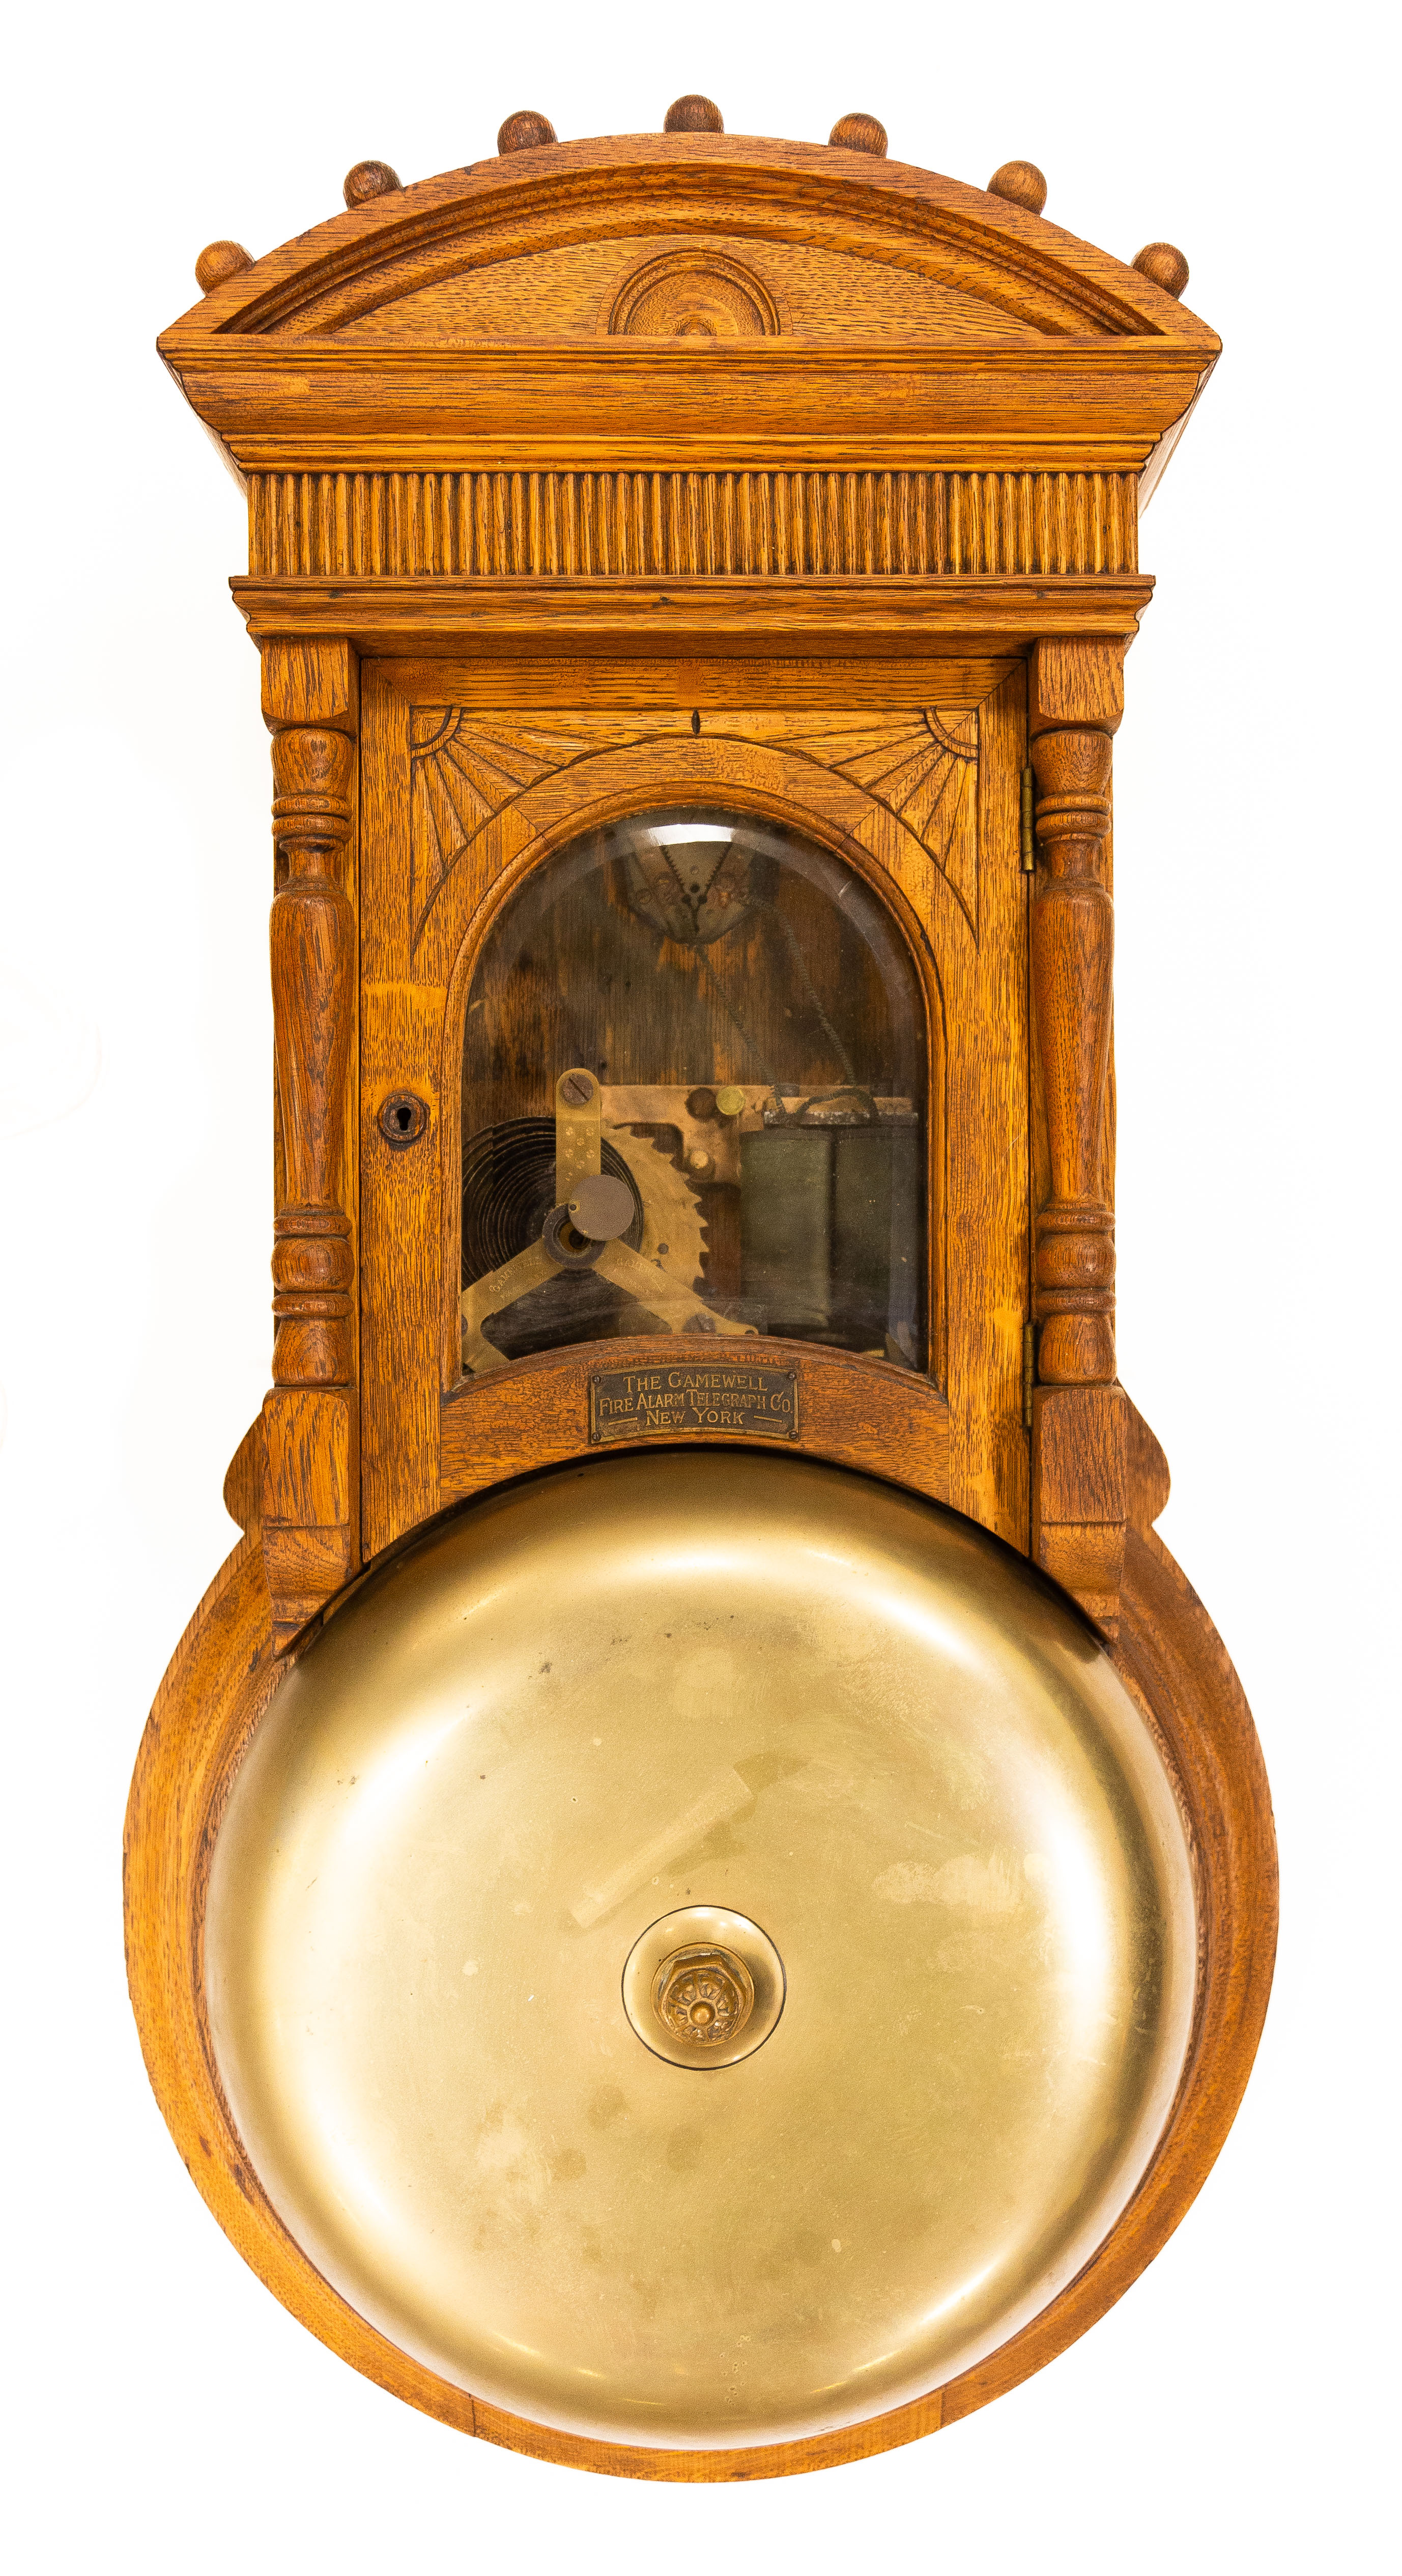 GAMEWELL FIRE ALARM Carved oak